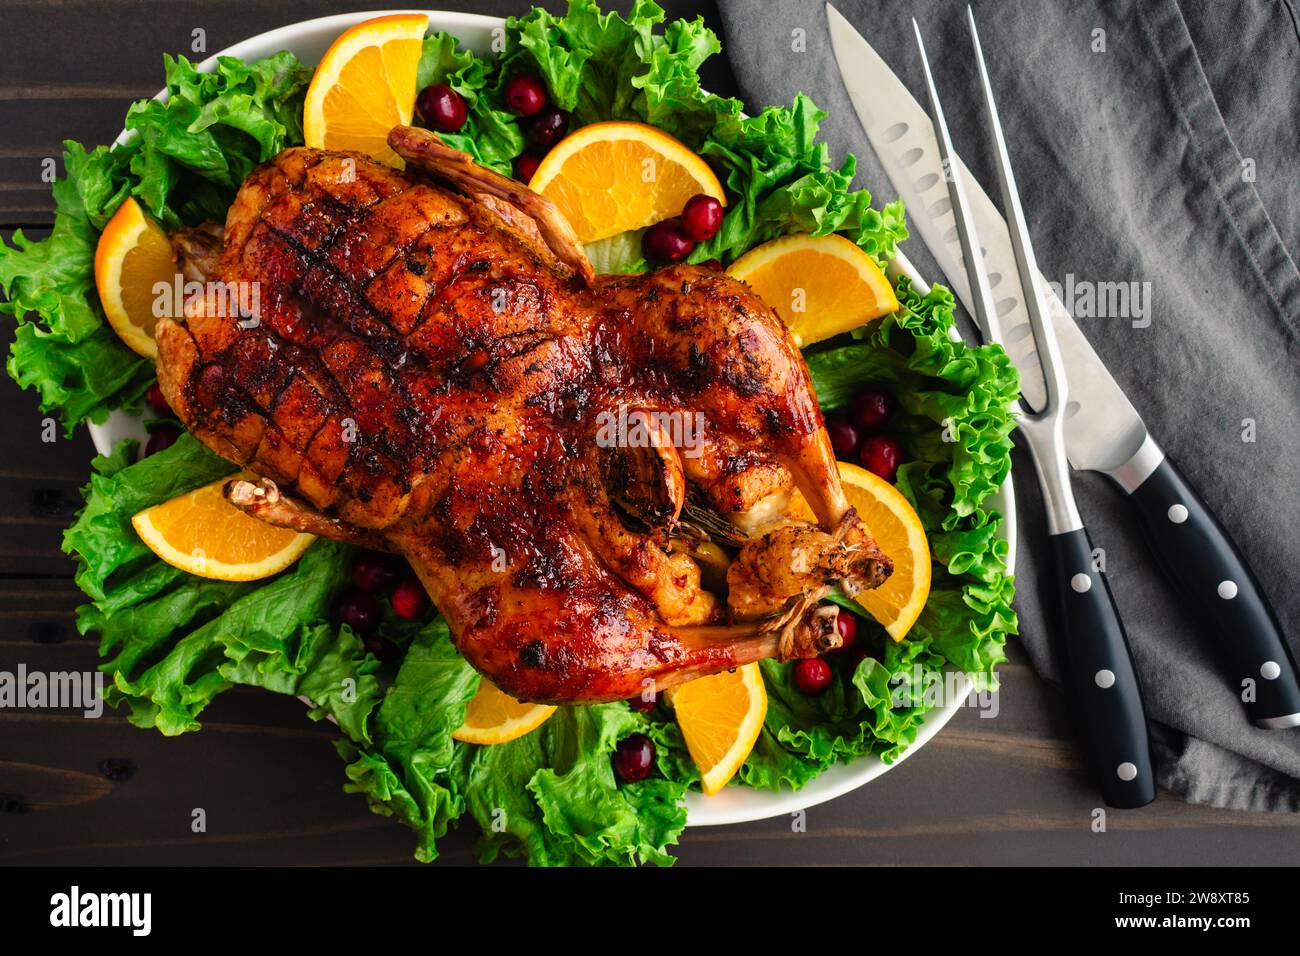 Christmas Roast Duck With Cranberry-Orange Glaze: Roasted and glazed whole duck on a garnished platter with carving knife and fork Stock Photo